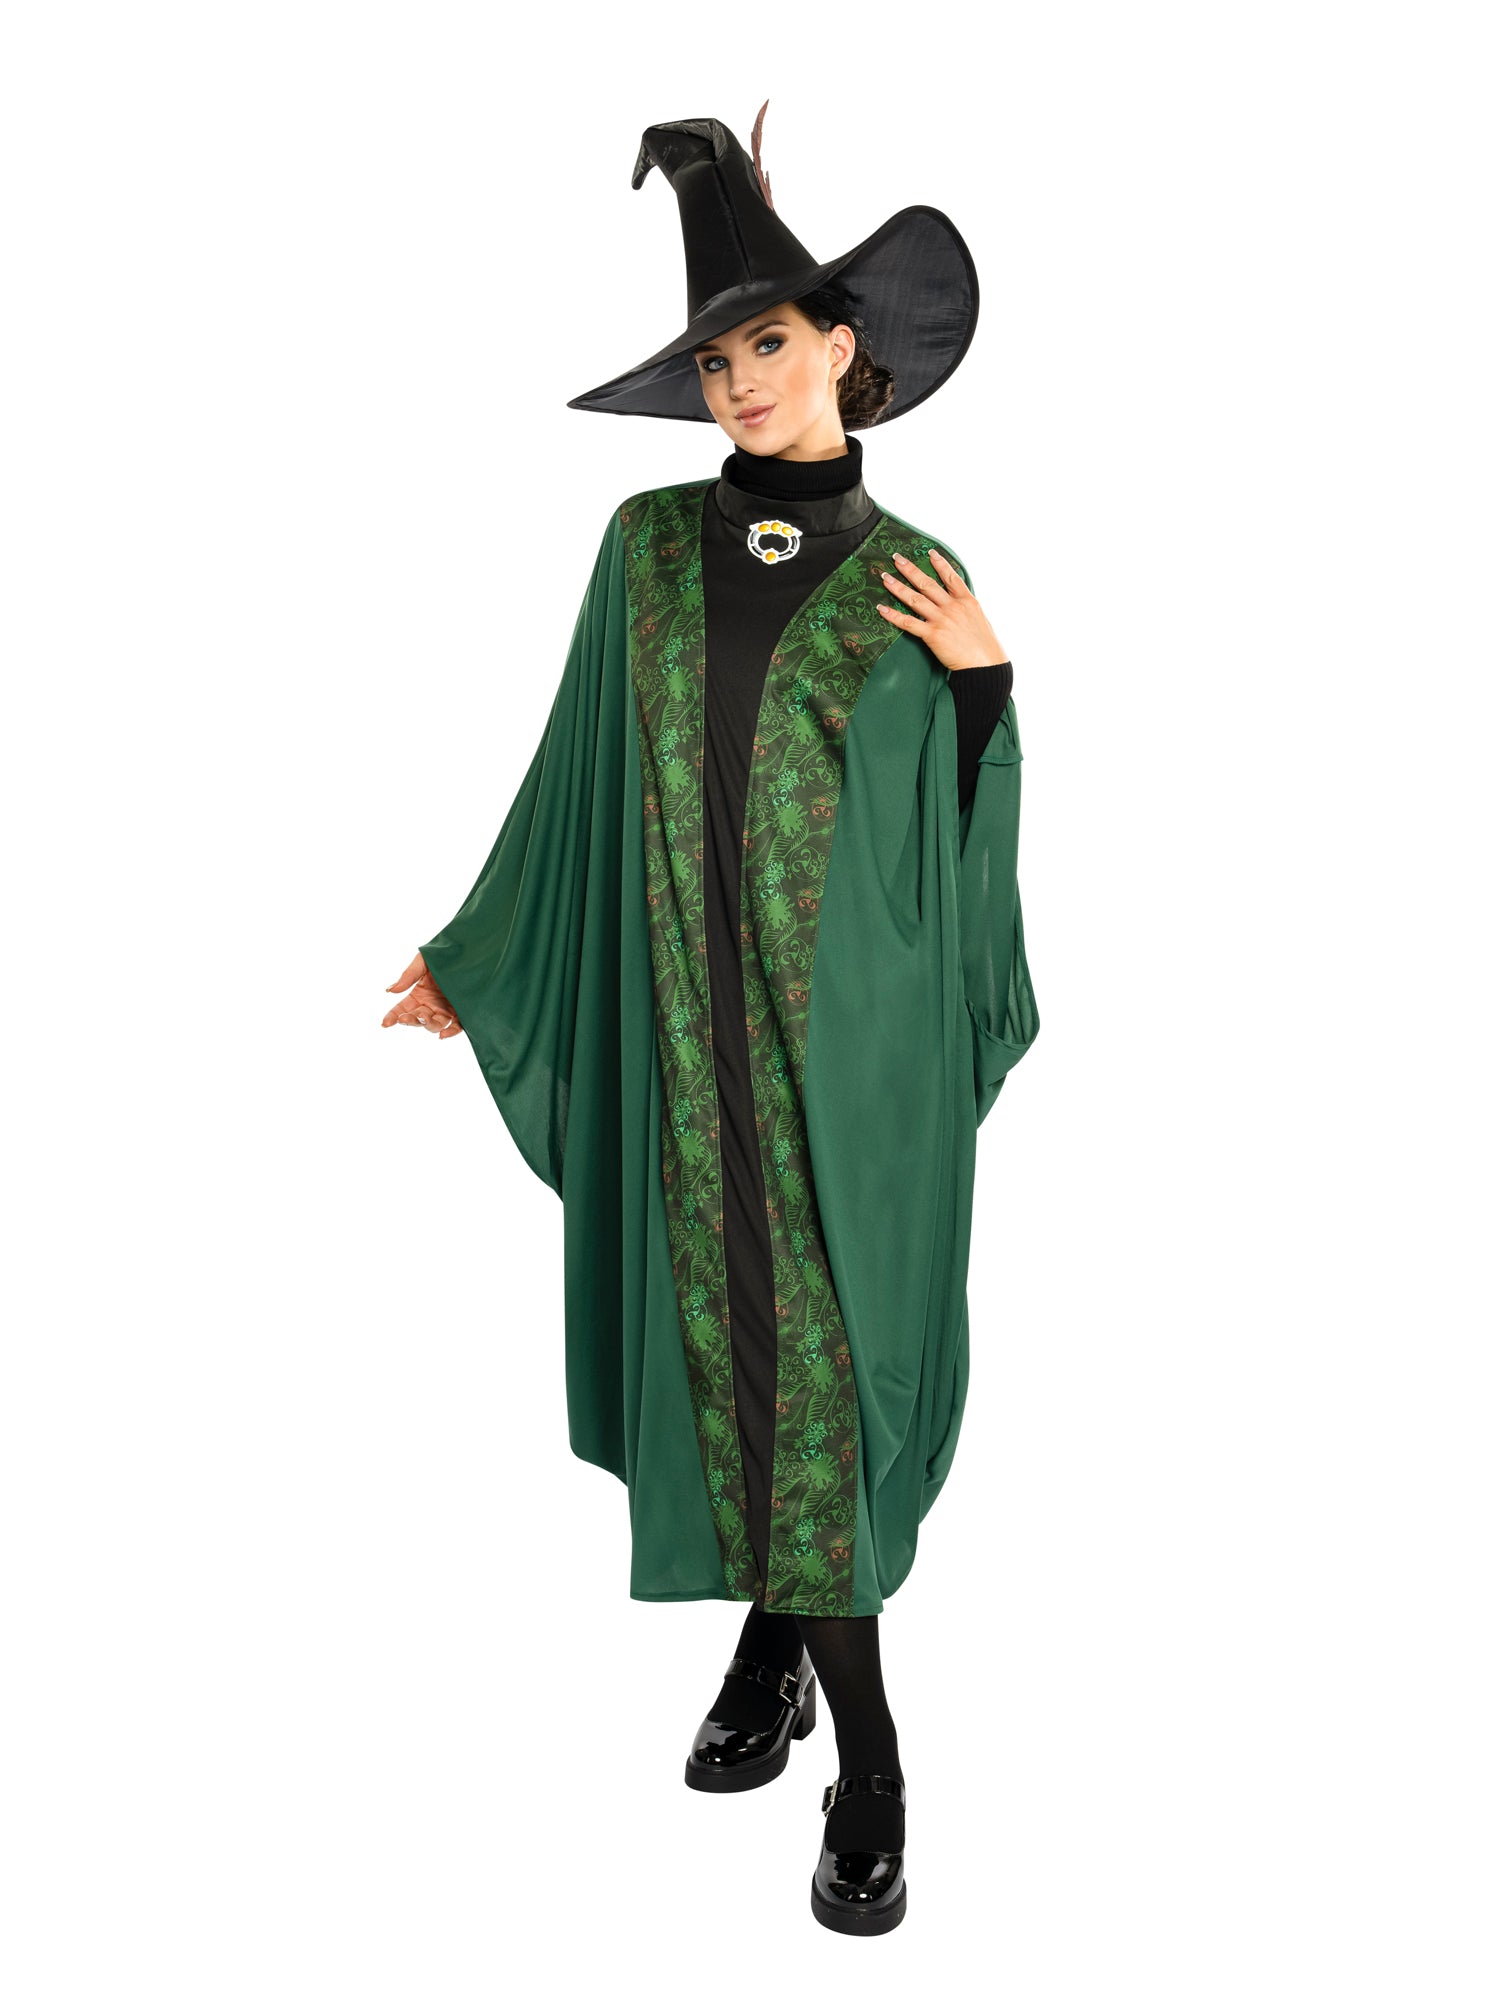 Officially licensed Professor Mcgonagall Costume Adult